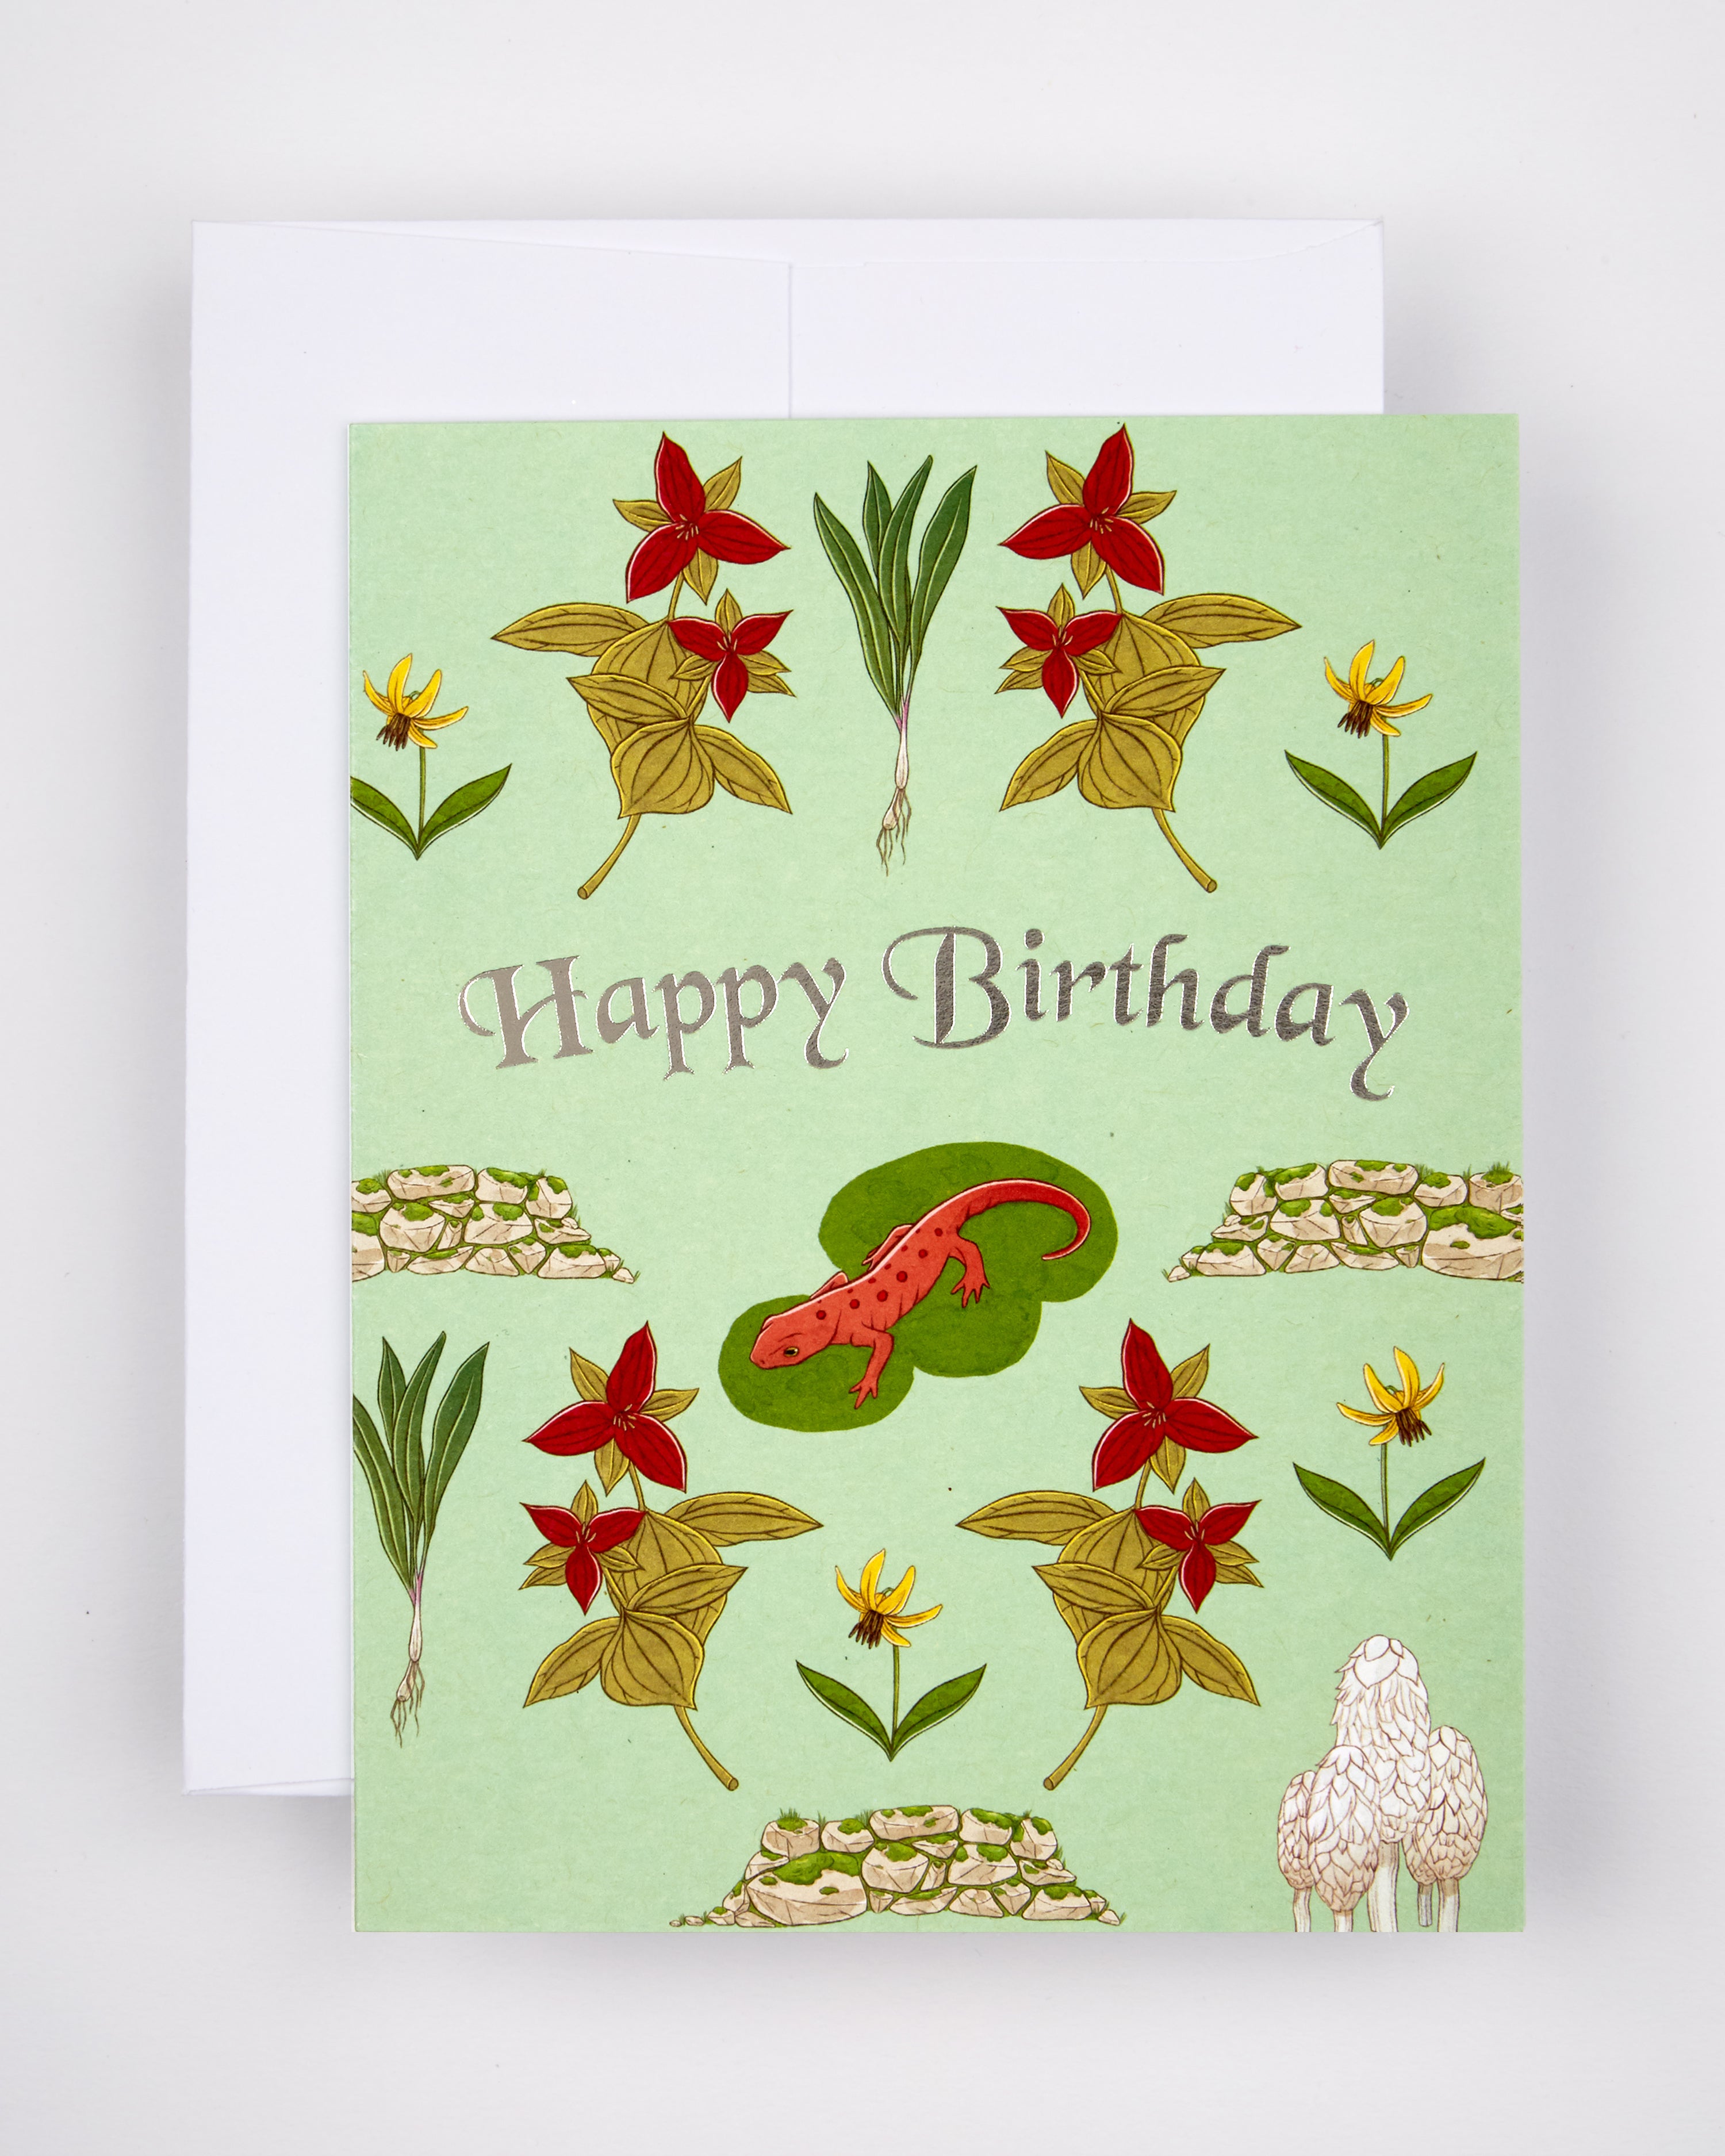 Greeting card with the text Happy Birthday amid flowers and a salamander